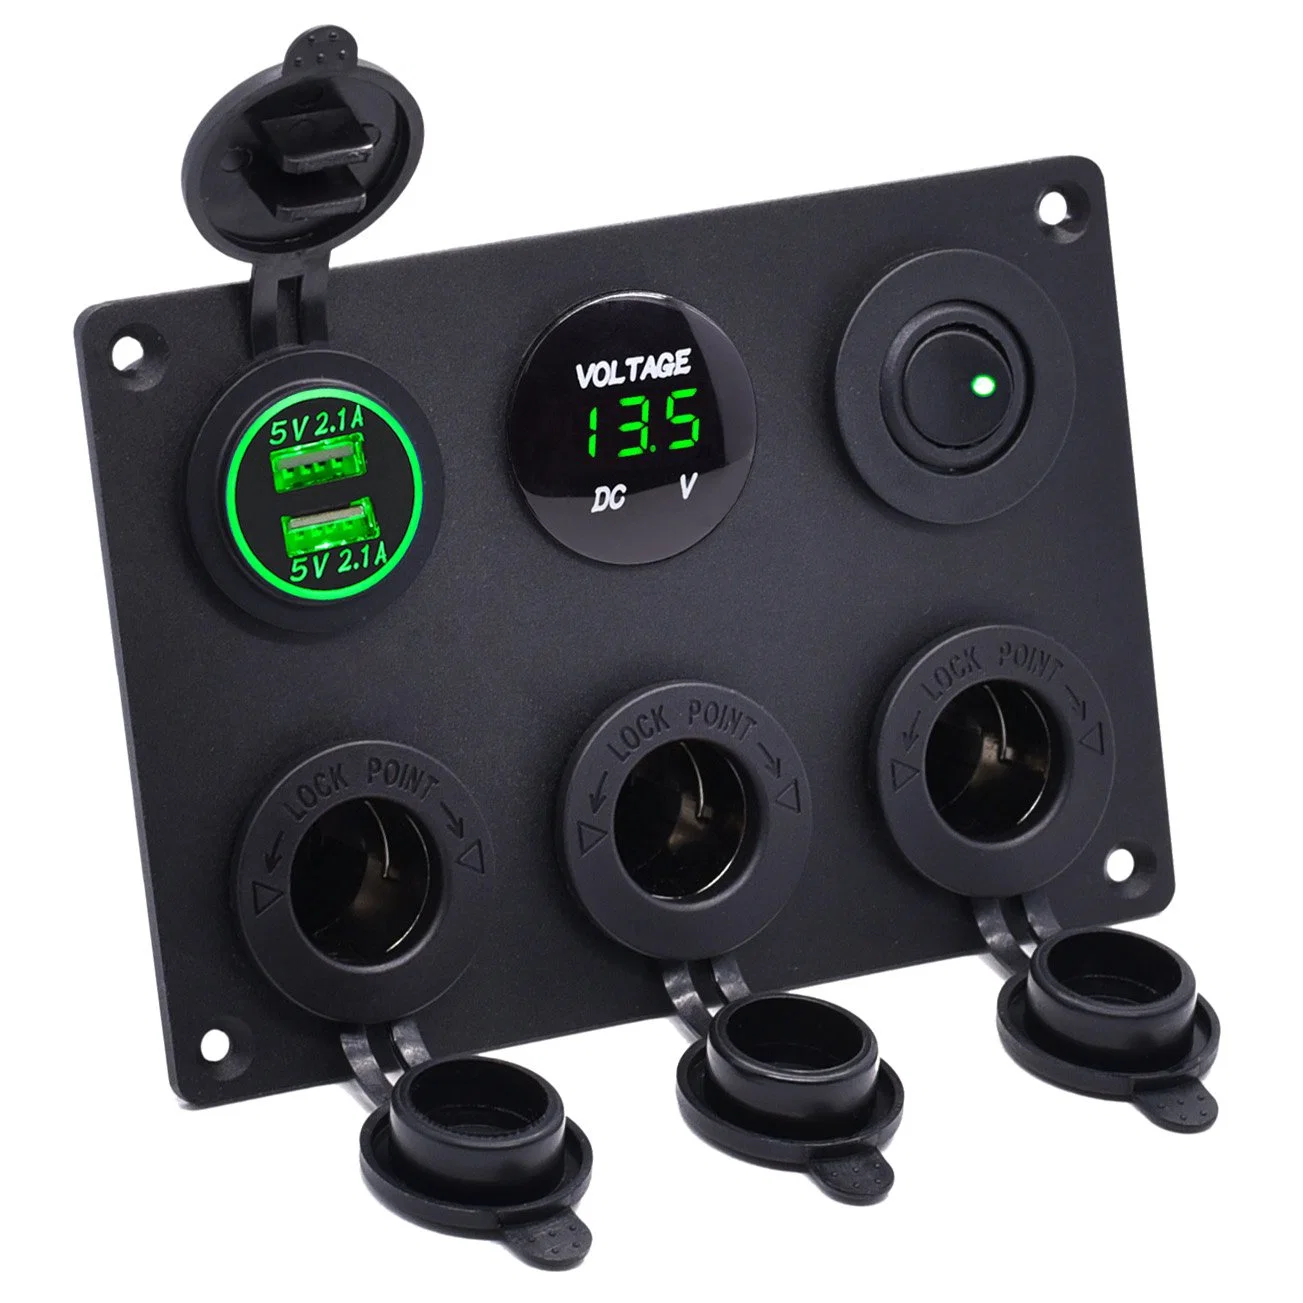 6 Hole Aluminum Automotive Panel with Dual USB Socket, Voltmeter, Power Socket and Toggle Switch